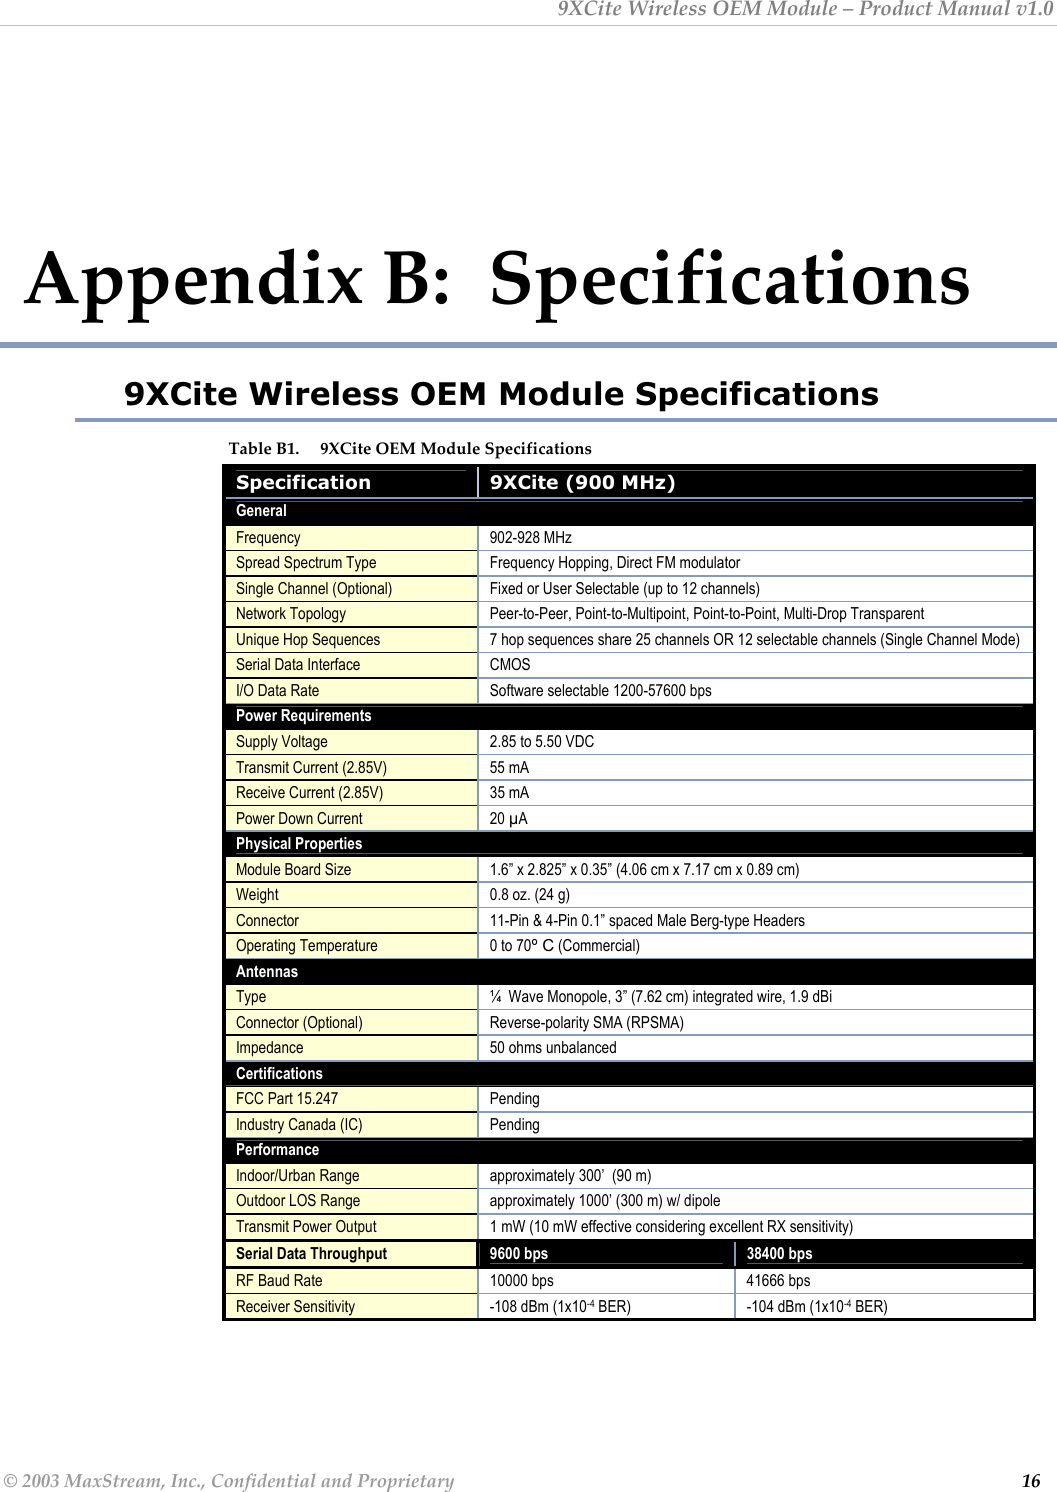 9XCite Wireless OEM Module – Product Manual v1.0  Appendix B:  Specifications 9XCite Wireless OEM Module Specifications Table B1.     9XCite OEM Module Specifications Specification  9XCite (900 MHz) General Frequency 902-928 MHz Spread Spectrum Type  Frequency Hopping, Direct FM modulator Single Channel (Optional)  Fixed or User Selectable (up to 12 channels) Network Topology  Peer-to-Peer, Point-to-Multipoint, Point-to-Point, Multi-Drop Transparent Unique Hop Sequences  7 hop sequences share 25 channels OR 12 selectable channels (Single Channel Mode) Serial Data Interface  CMOS I/O Data Rate  Software selectable 1200-57600 bps Power Requirements Supply Voltage  2.85 to 5.50 VDC  Transmit Current (2.85V)  55 mA Receive Current (2.85V)  35 mA Power Down Current  20 µA Physical Properties Module Board Size  1.6” x 2.825” x 0.35” (4.06 cm x 7.17 cm x 0.89 cm) Weight   0.8 oz. (24 g) Connector  11-Pin &amp; 4-Pin 0.1” spaced Male Berg-type Headers Operating Temperature  0 to 70º C (Commercial) Antennas Type  ¼  Wave Monopole, 3” (7.62 cm) integrated wire, 1.9 dBi Connector (Optional)  Reverse-polarity SMA (RPSMA) Impedance  50 ohms unbalanced Certifications FCC Part 15.247  Pending Industry Canada (IC)  Pending Performance Indoor/Urban Range  approximately 300’  (90 m) Outdoor LOS Range  approximately 1000’ (300 m) w/ dipole Transmit Power Output  1 mW (10 mW effective considering excellent RX sensitivity) Serial Data Throughput  9600 bps   38400 bps RF Baud Rate  10000 bps  41666 bps Receiver Sensitivity  -108 dBm (1x10-4 BER)  -104 dBm (1x10-4 BER) © 2003 MaxStream, Inc., Confidential and Proprietary                                                                                                                         16 